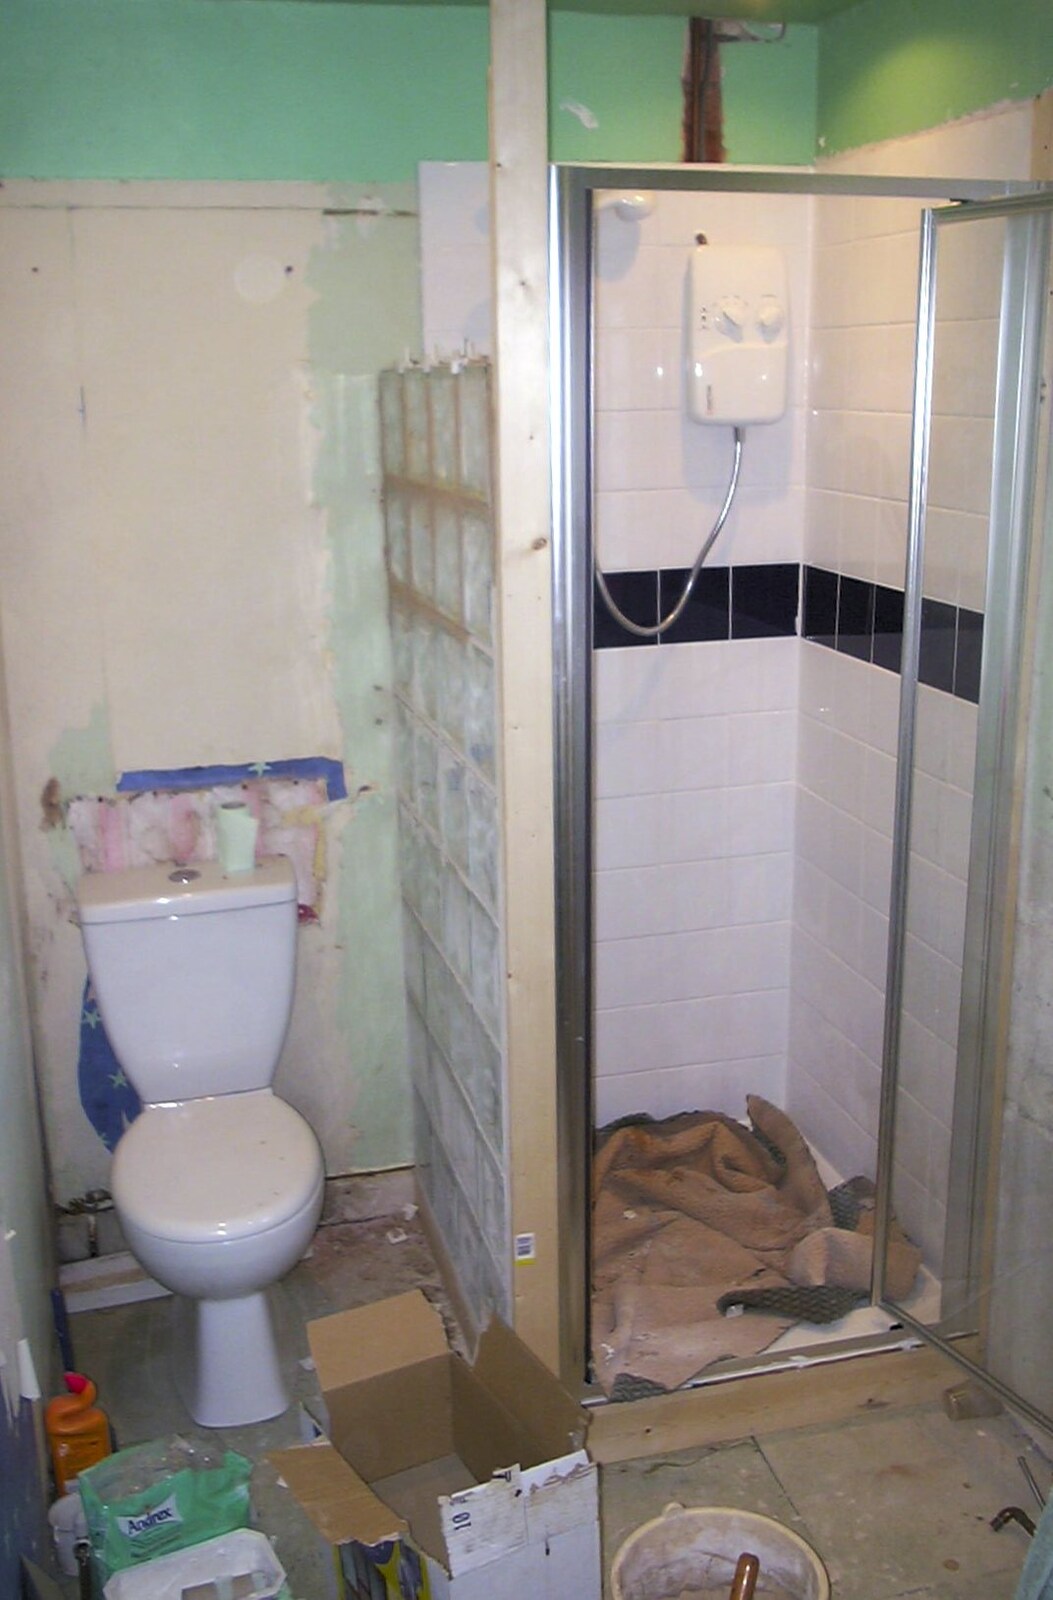 A new toilet and a near-finished shower from Bathroom Rebuilding, Brome, Suffolk - 1st February 2002